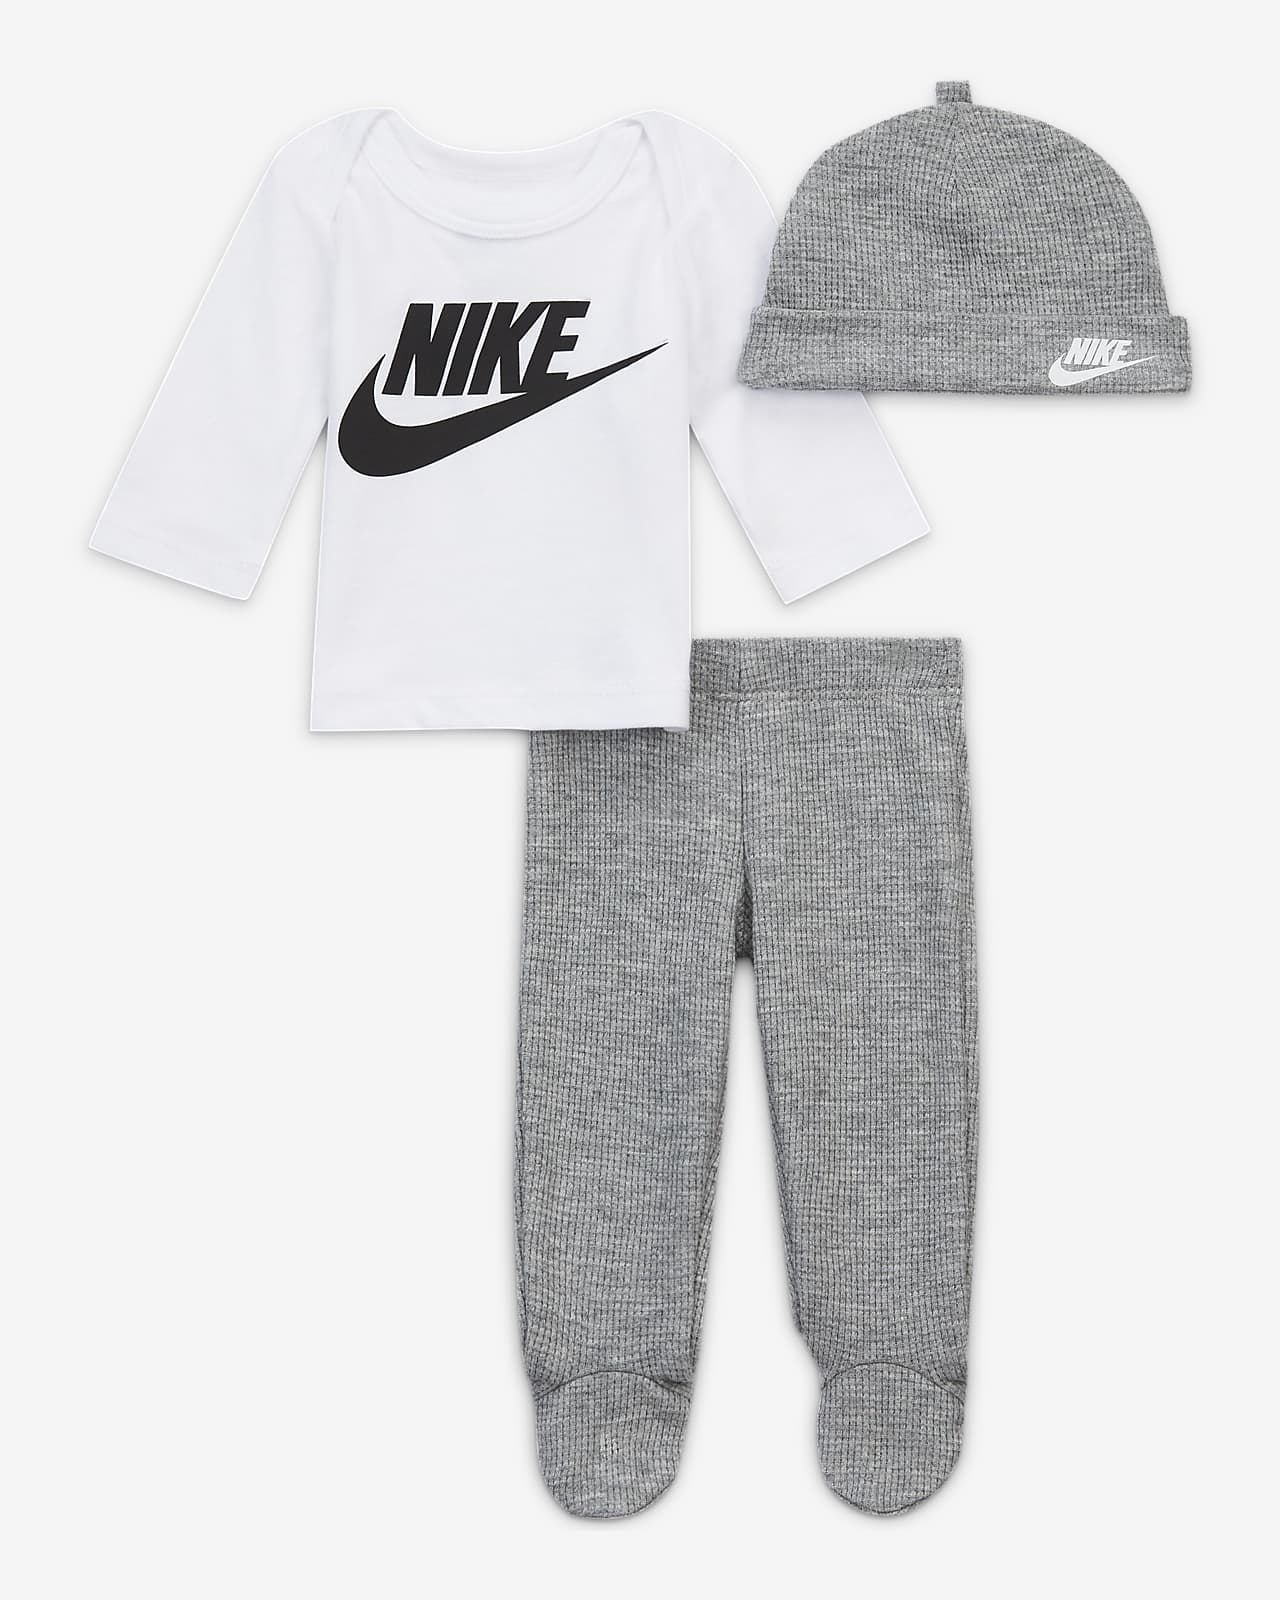 Vervagen Afdaling wrijving Nike Baby (Preemie) T-Shirt, Footed Pants and Hat Set. Nike.com